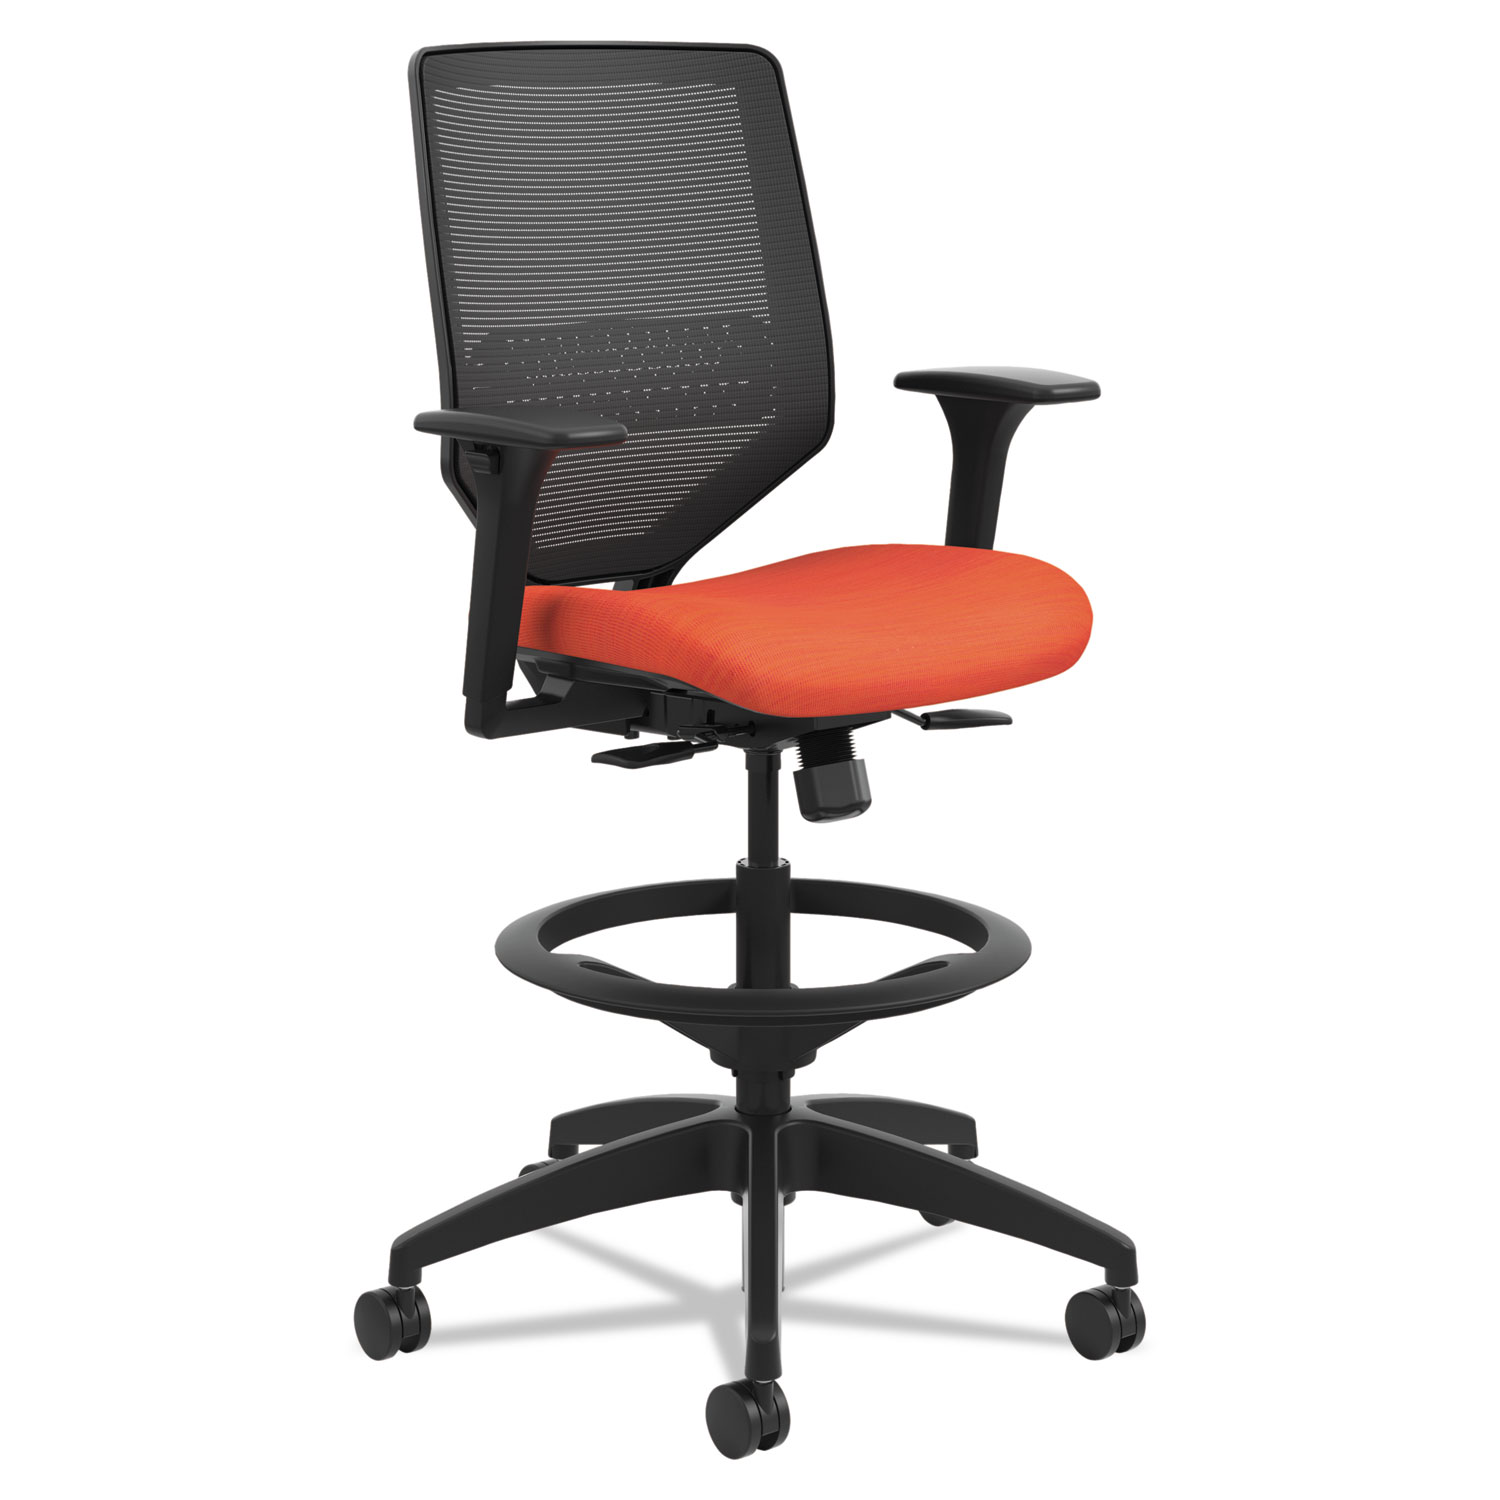  HON HONSVSM1ALC46T Solve Series Mesh Back Task Stool, Supports up to 300 lbs., Bittersweet Seat, Bittersweet Back, Black Base (HONSVSM1ALC46T) 